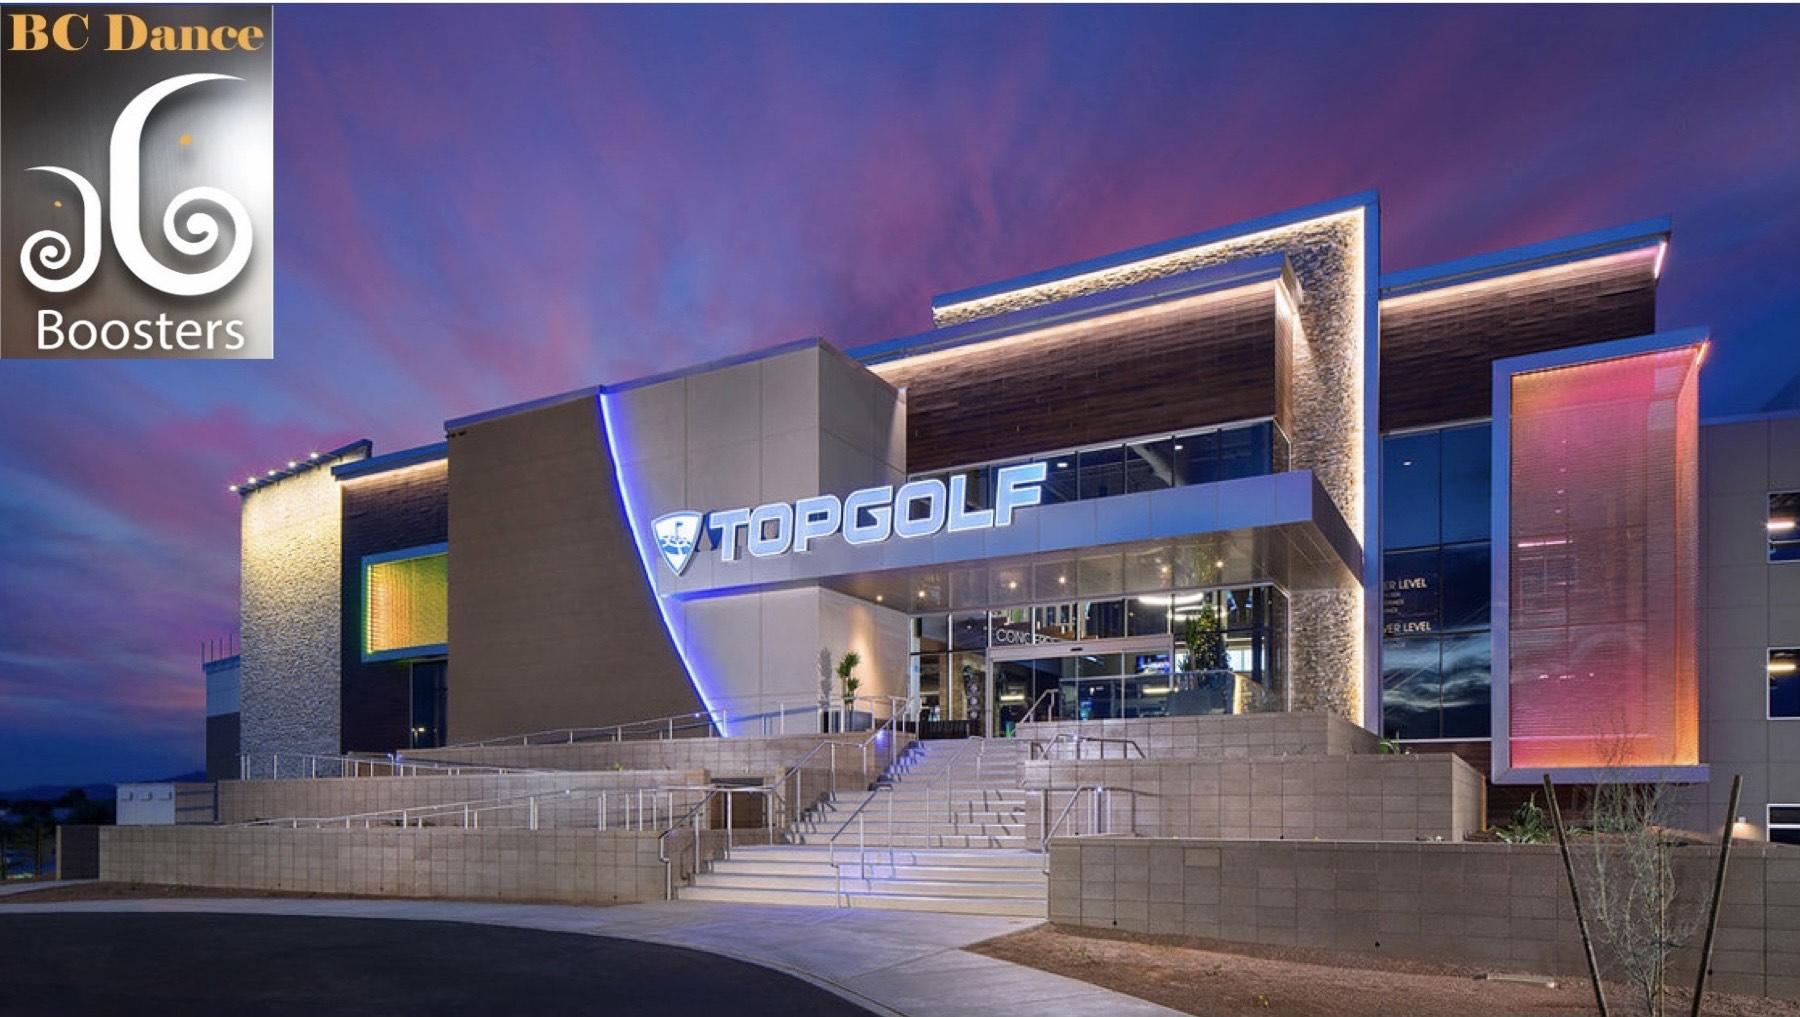 Topgolf Fundraiser with BC Dance Boosters